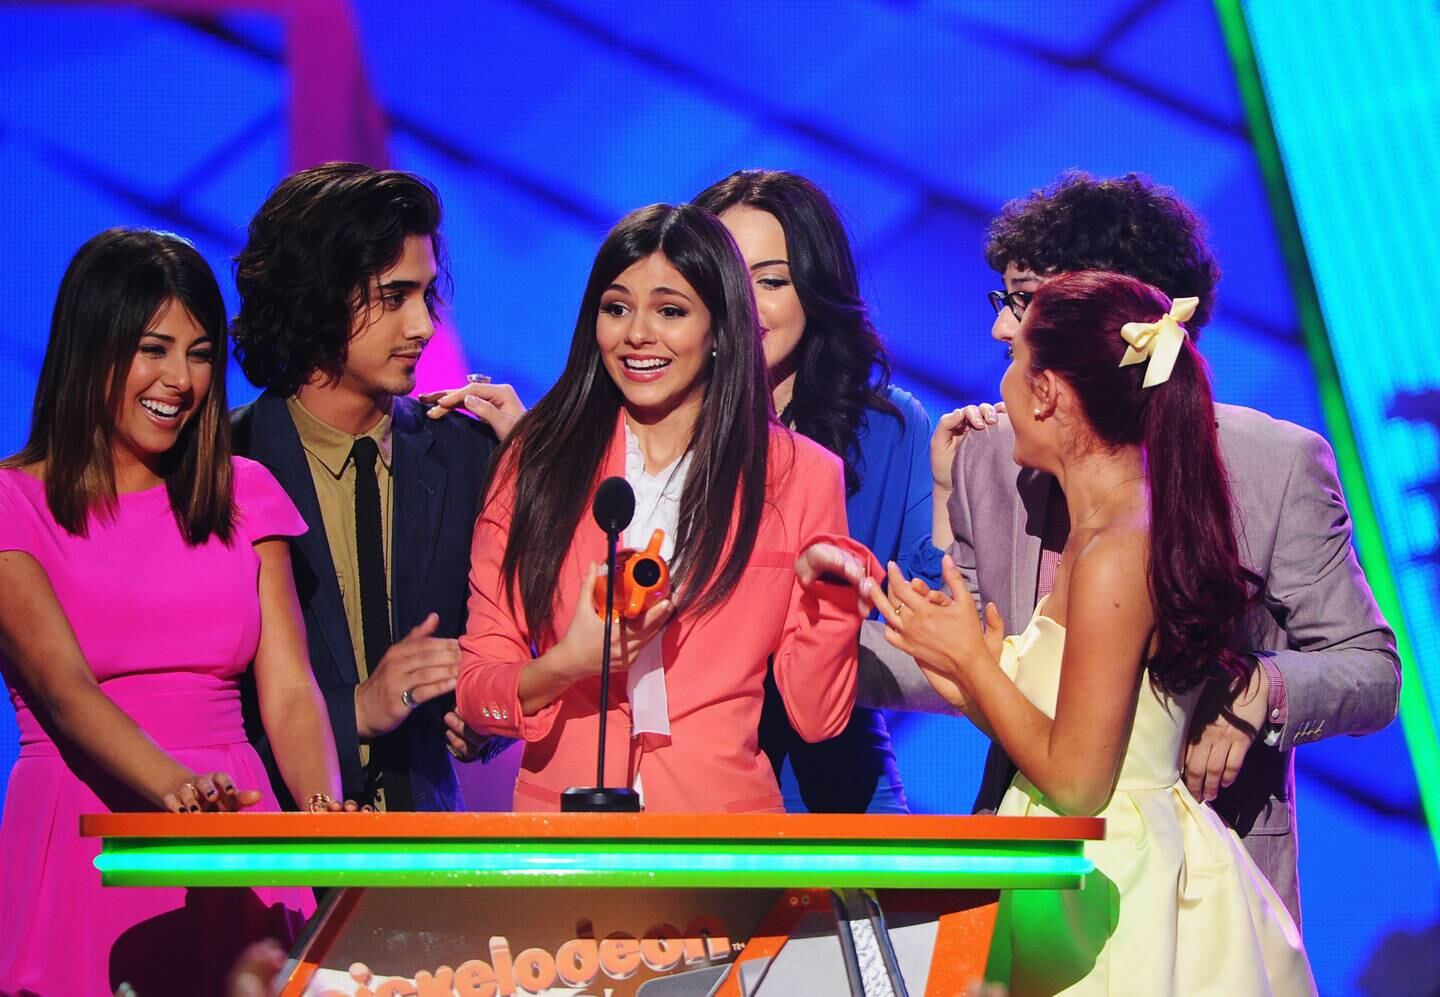 Cast members from 'Victorious' onstage at Nickelodeon's Annual Kids' Choice Awards. Lida picked up the language by watching hours of the children’s channel Nickelodeon. Getty Images